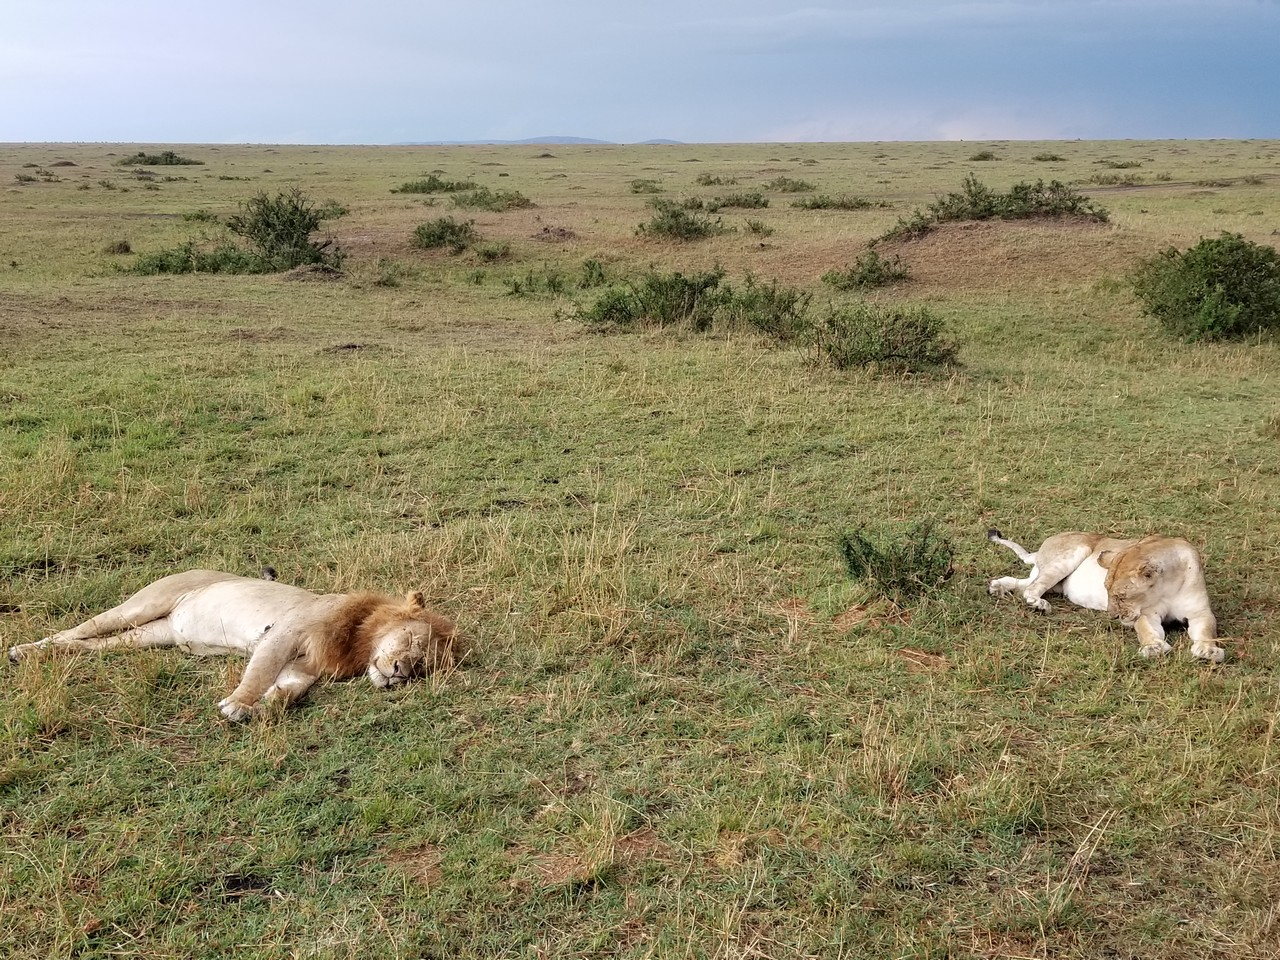 two lions lying in a grassy field